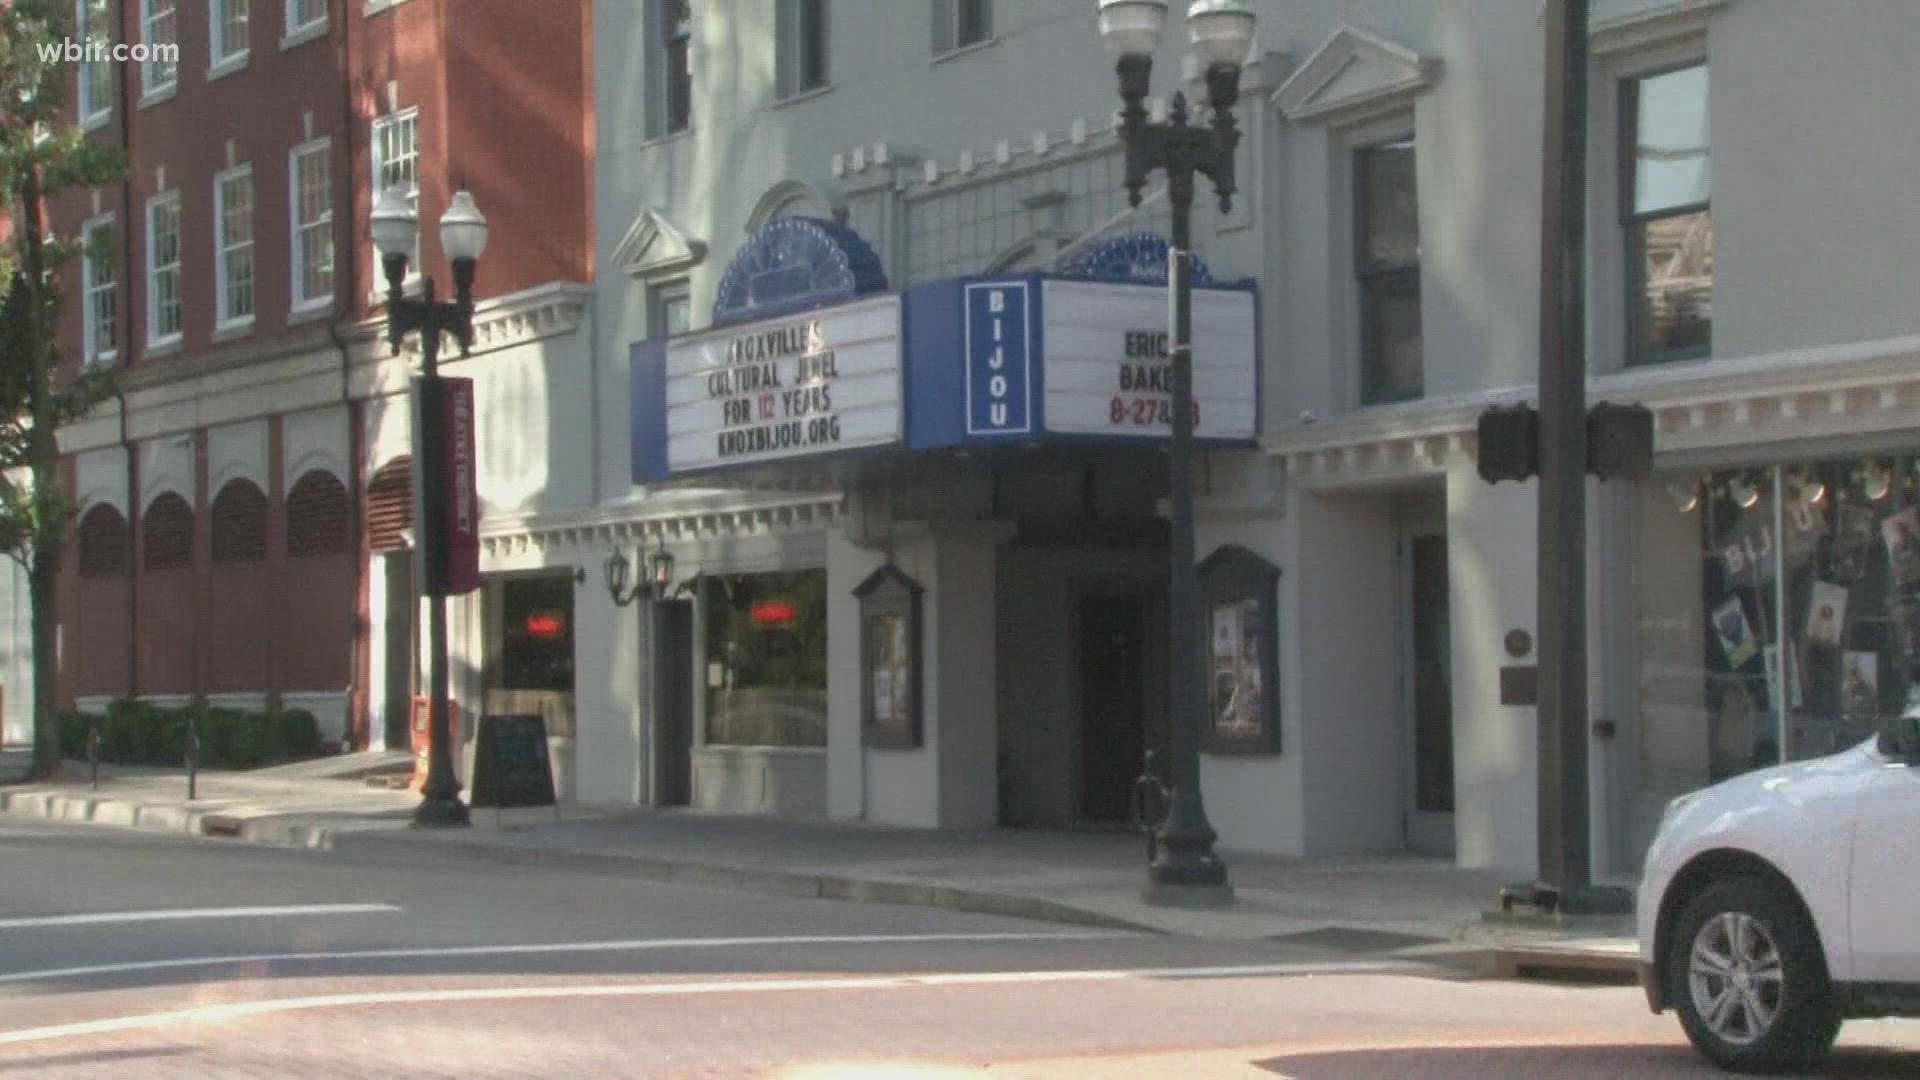 Five downtown Knoxville music venues will require a vaccine card or a negative COVID test to attend shows.